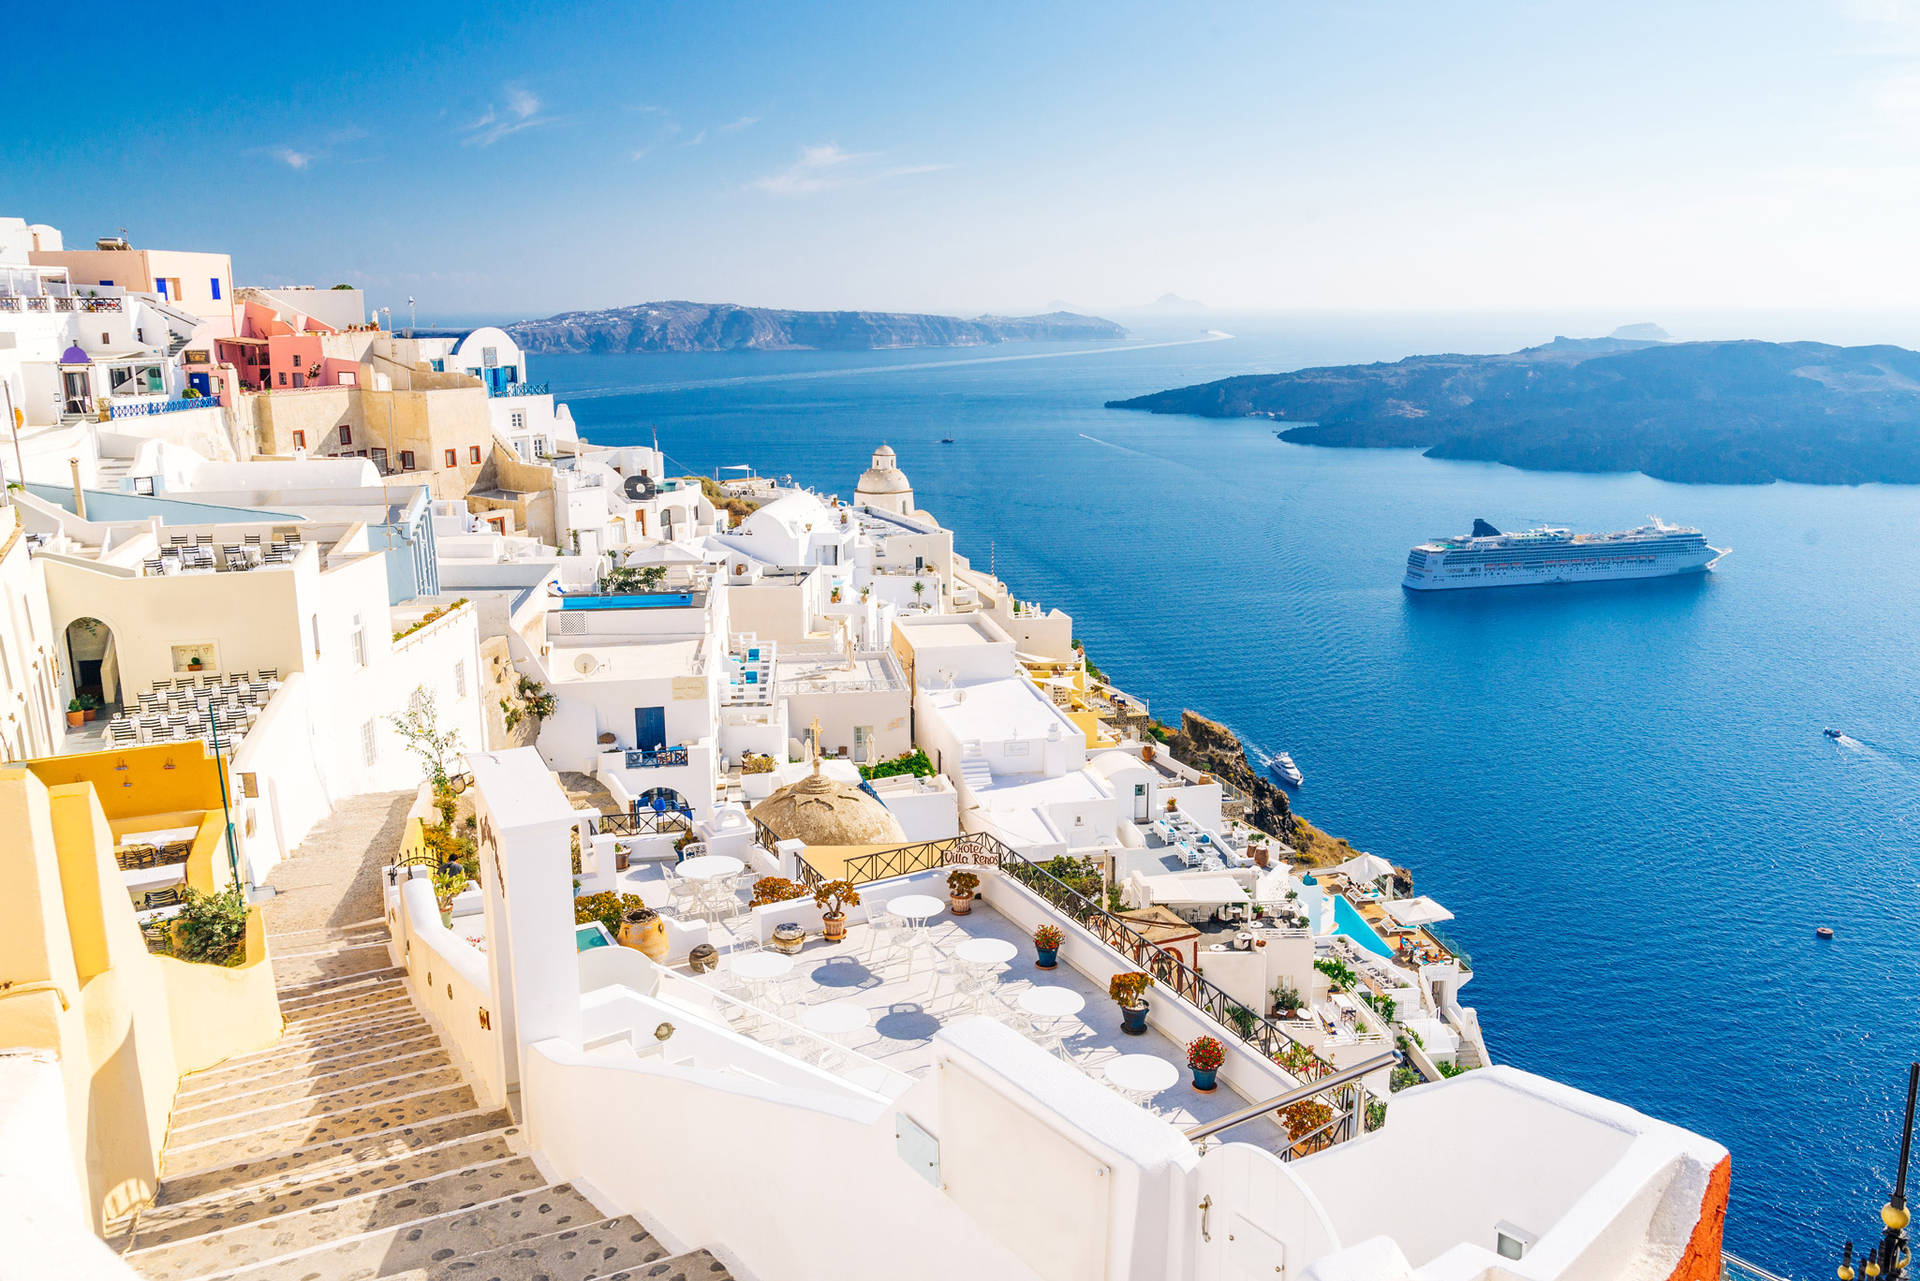 Santorini View With Churches Against Old Open Blue Door In Oia Village  Greece Stock Photo  Download Image Now  iStock